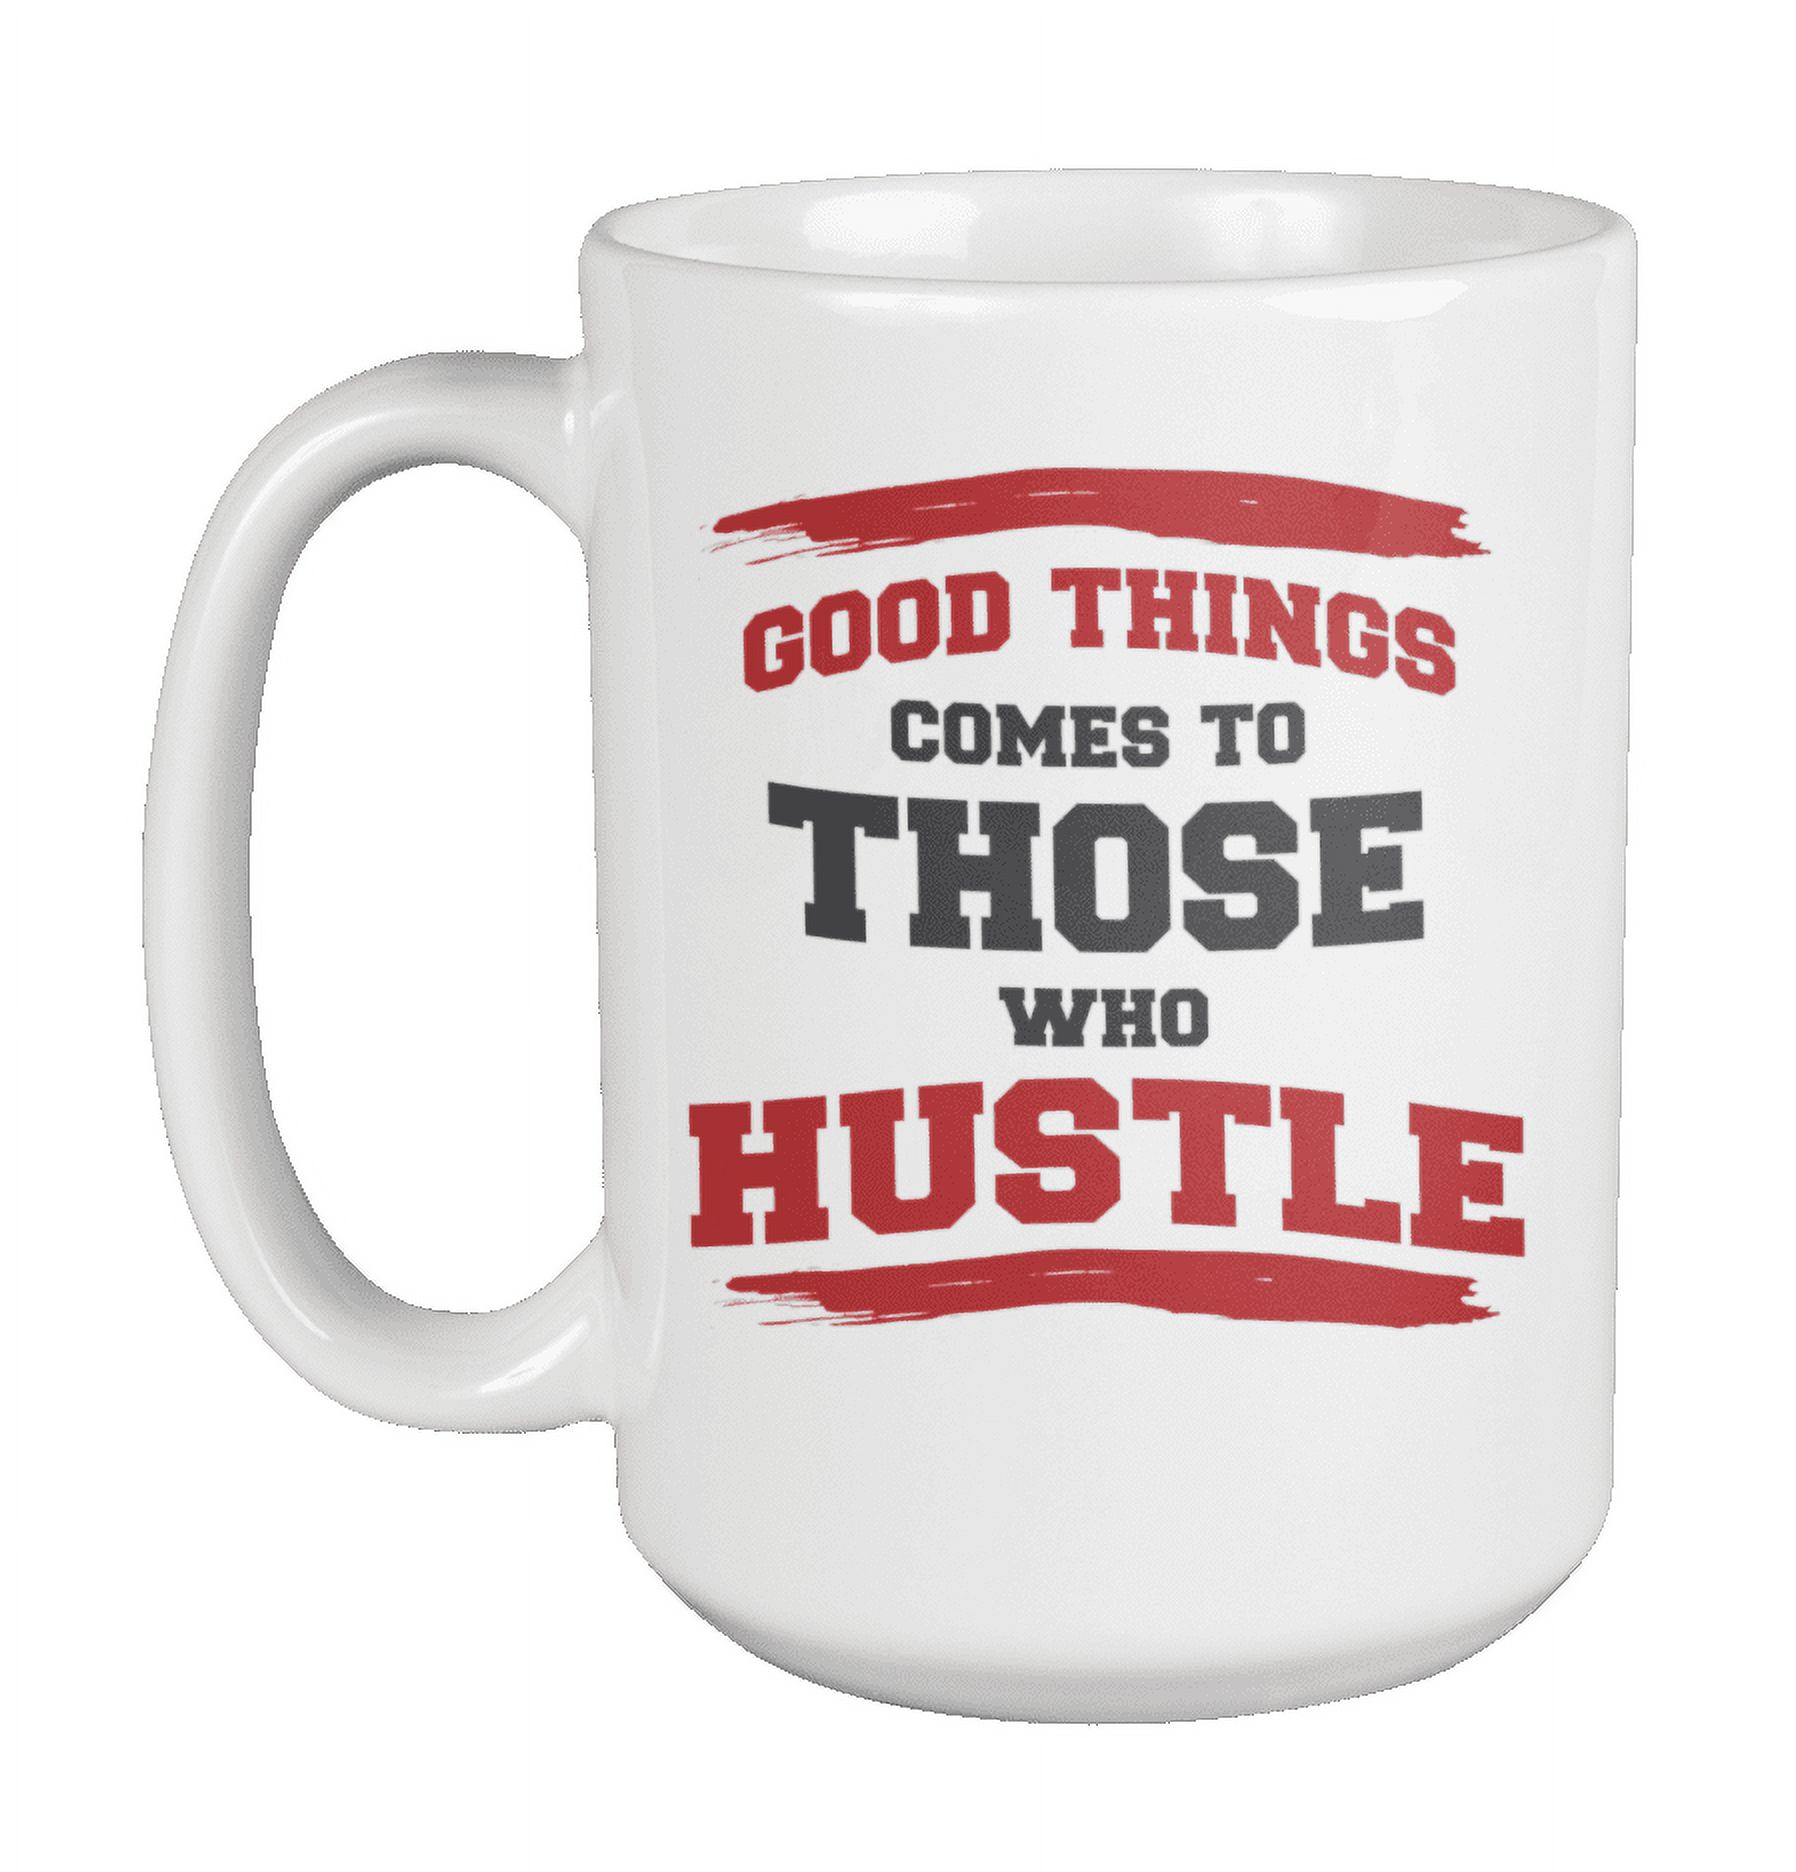 Good Things Come To Those Who Hustle Inspirational Quotes Coffee & Tea Gift Mug Cup For Business Coach, Speaker, Adviser, Influencer, Manager, Team Leader, And Founder (15oz) - image 1 of 3